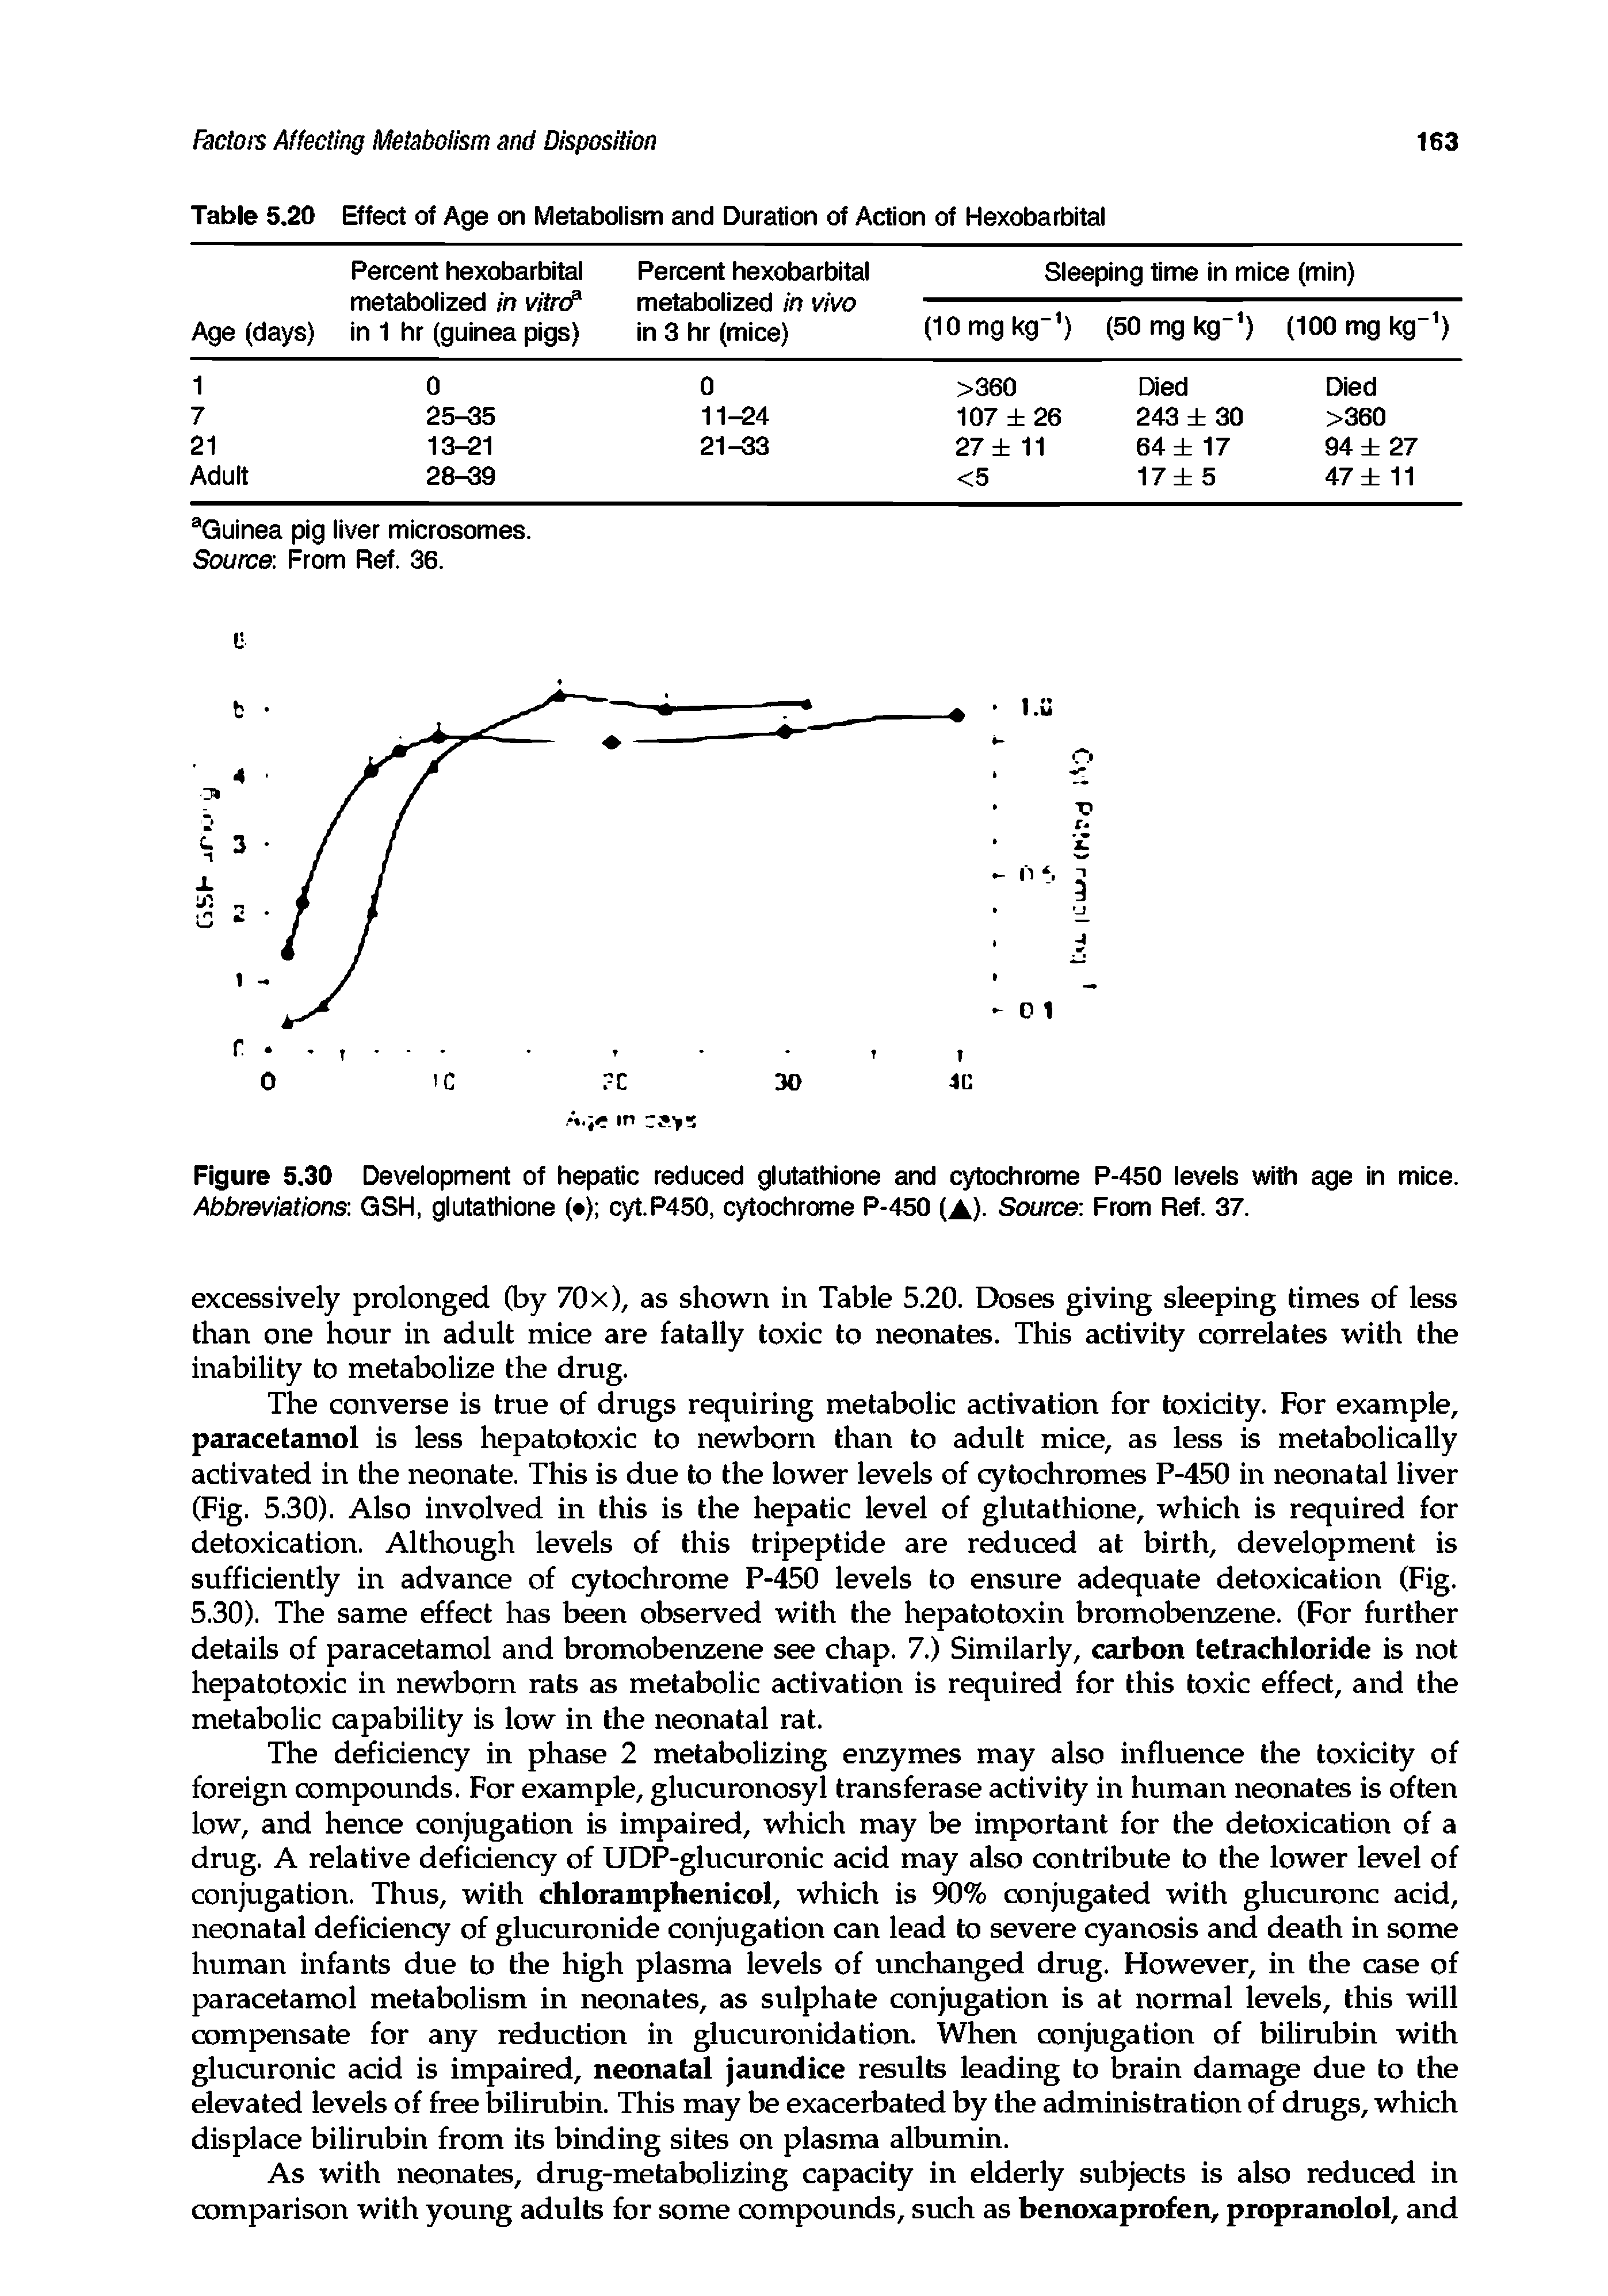 Figure 5.30 Development of hepatic reduced glutathione and cytochrome P-450 levels with age in mice. Abbreviations GSH, glutathione ( ) cyt.P450, cytochrome P-450 (A)- Source From Ref. 37.